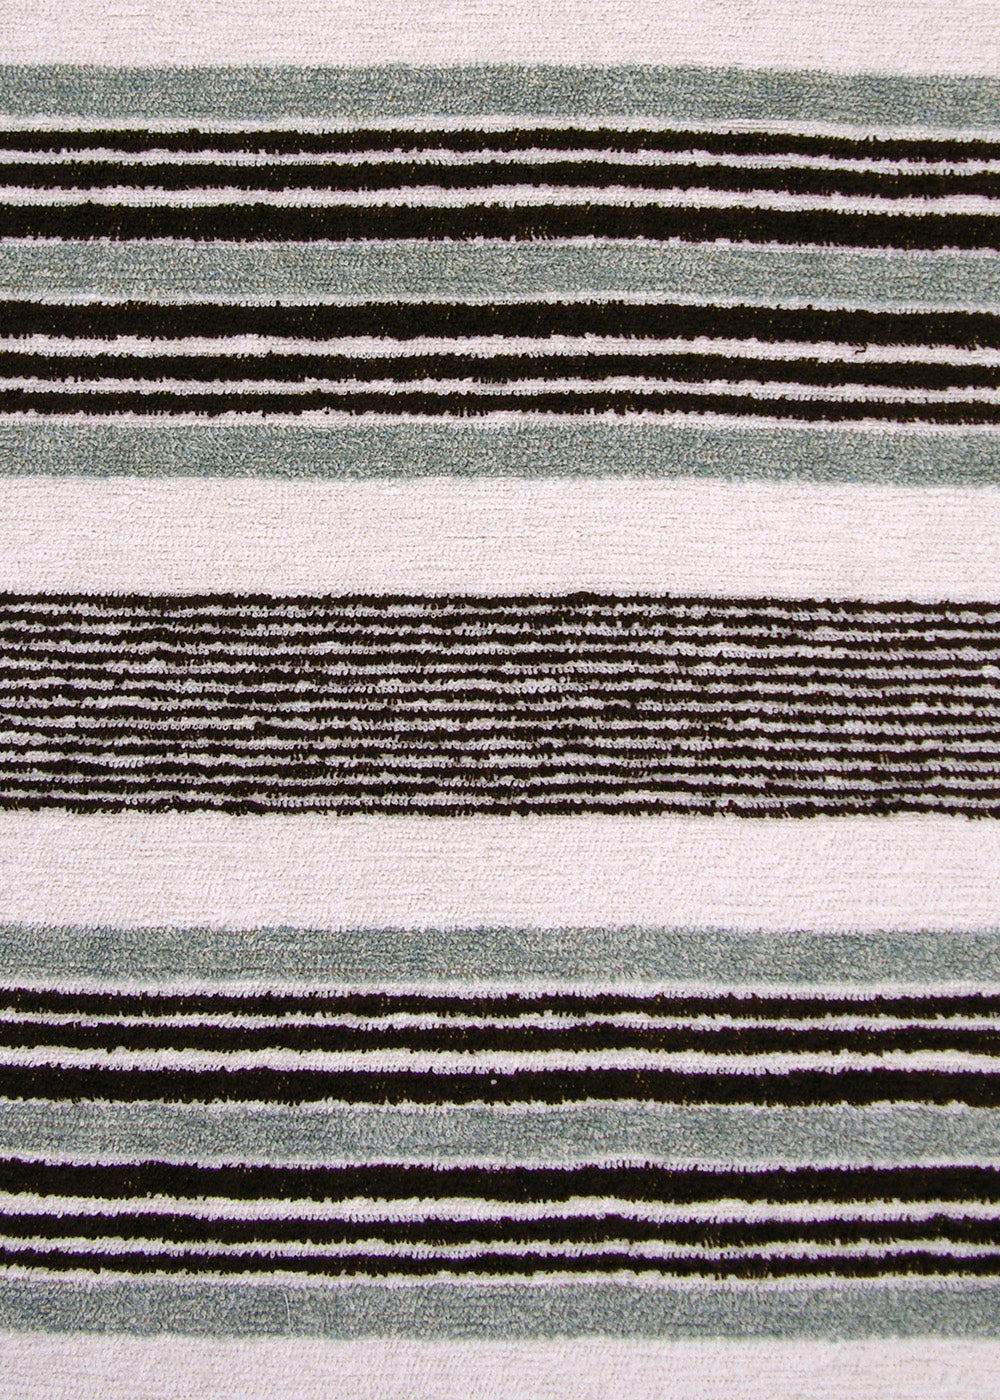 black, white and teal stripe terrycloth fabric